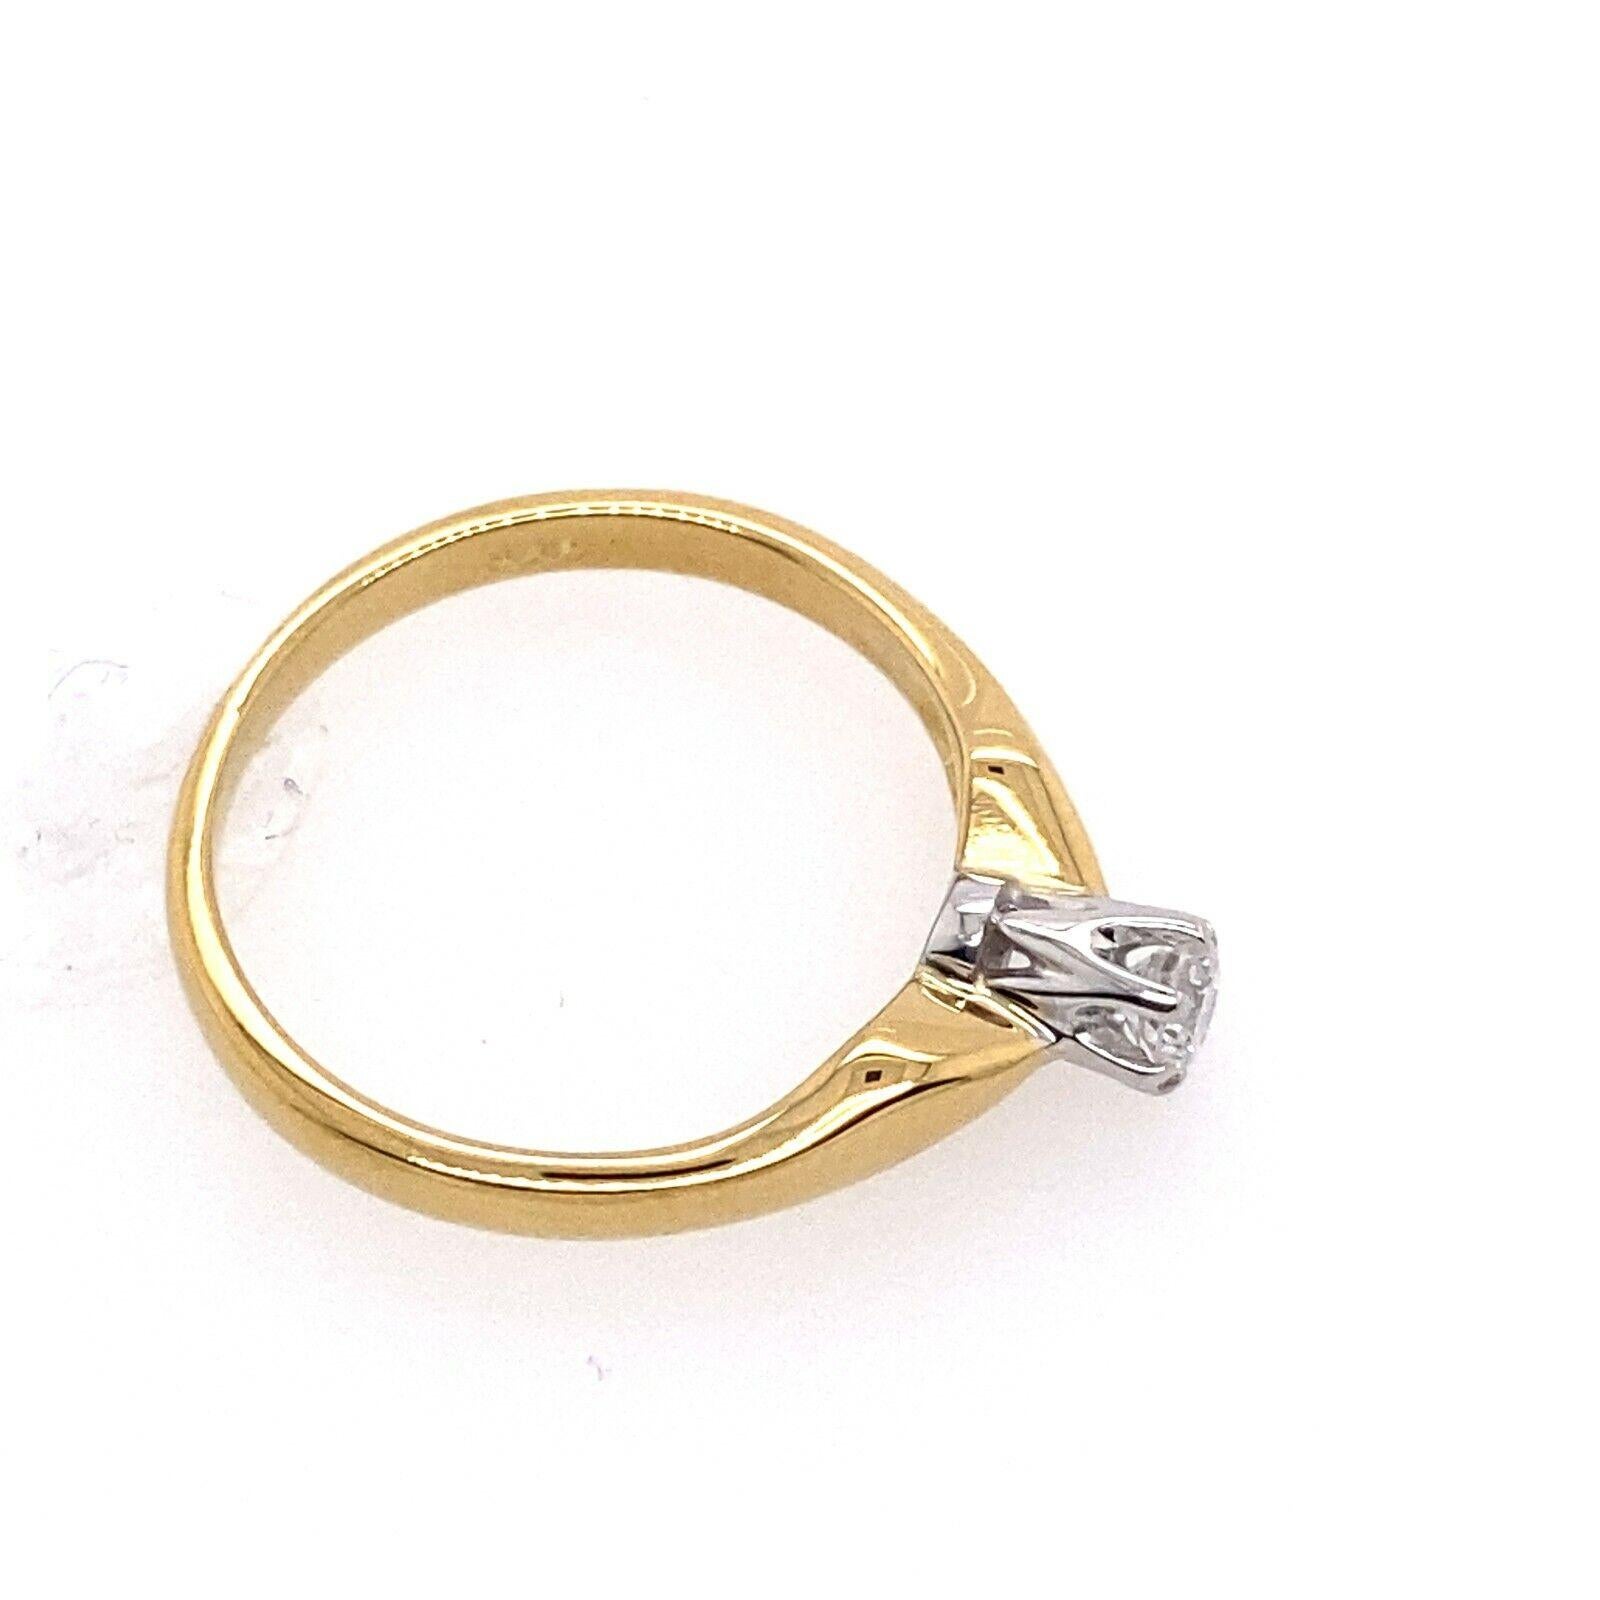 Classic 0.15ct Diamond Solitaire Ring, Set In 18ct Yellow & White Gold

This beautiful diamond solitaire ring is a timeless piece. The 0.15ct diamond is set in an 18ct yellow and white gold band, making it the perfect statement piece for everyday